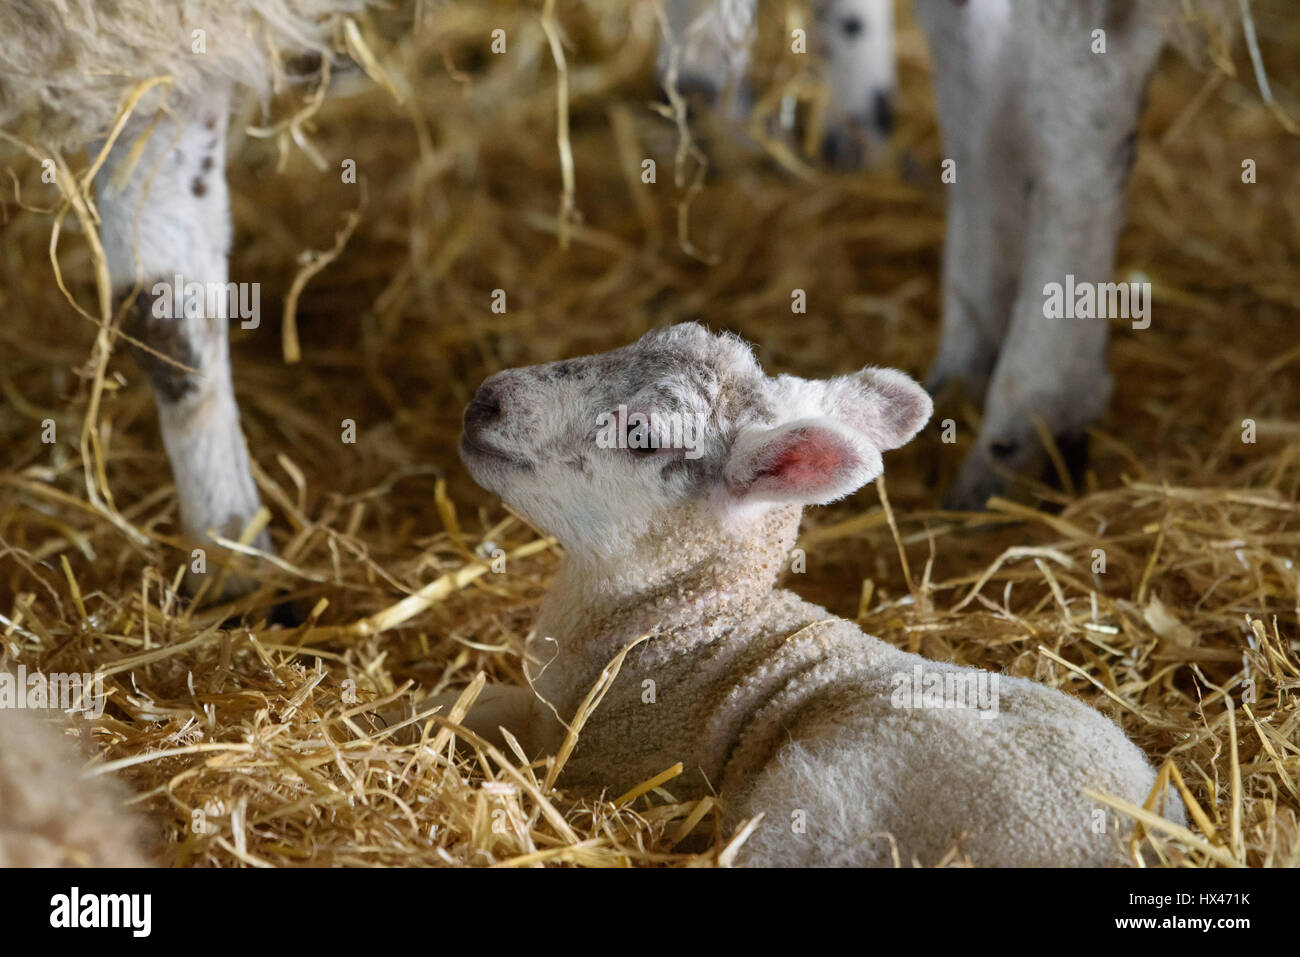 Chipping, Preston, Lancashire, UK. 24th March 2017. A lamb chose a good day to arrive at Saddle End Farm, Chipping, Preston, Lancashire. Credit: John Eveson/Alamy Live News Stock Photo